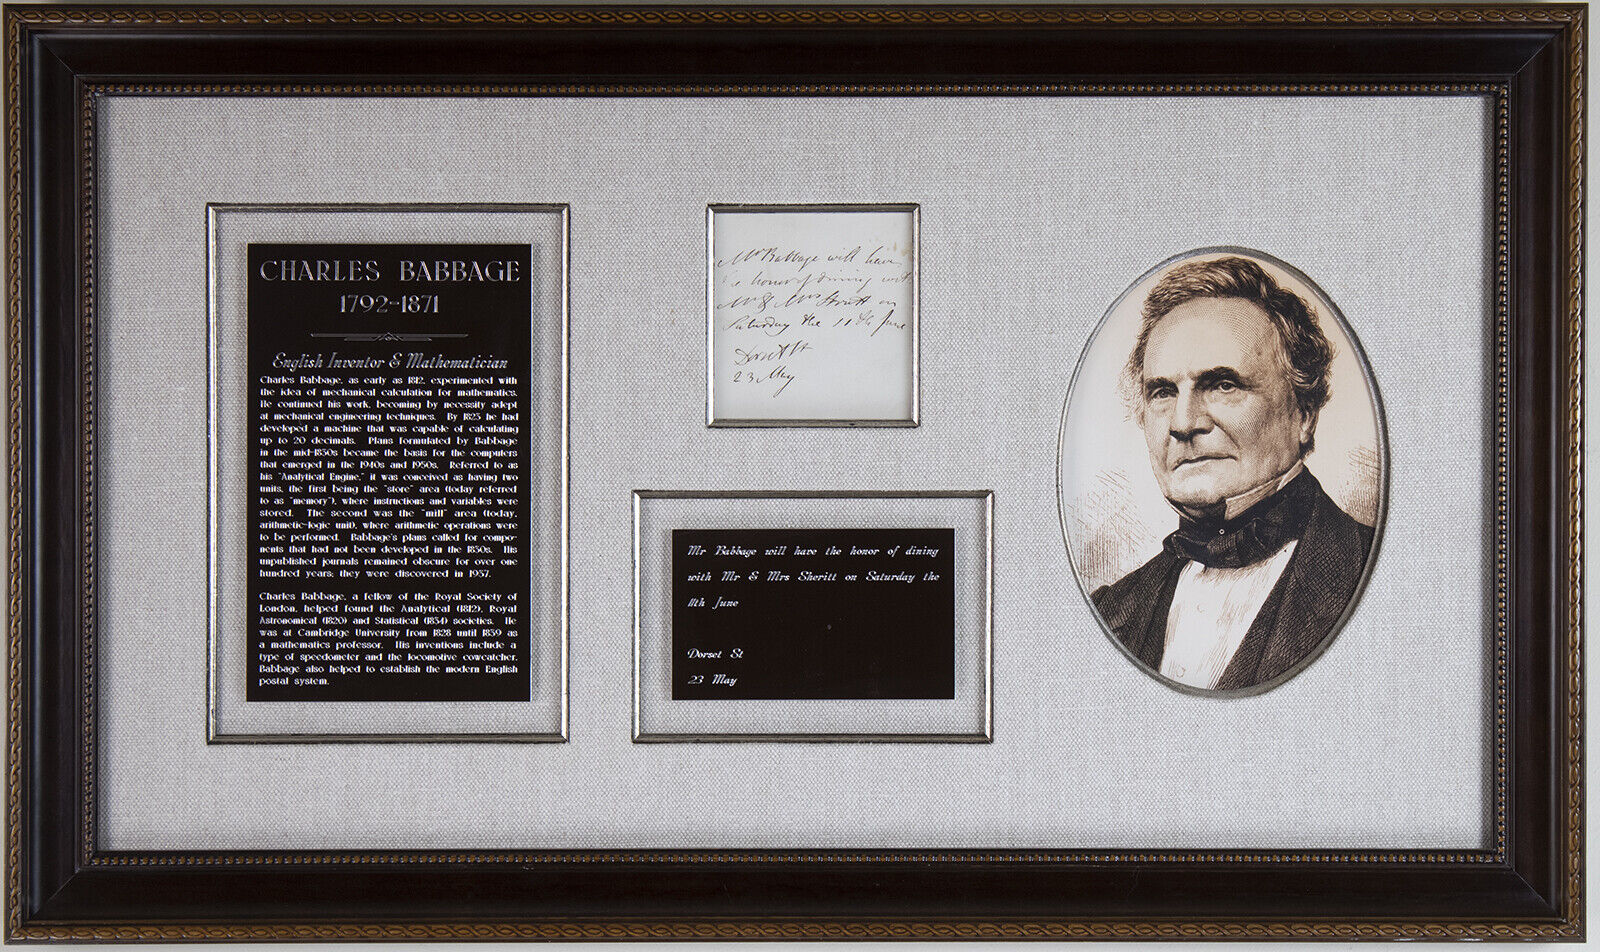 CHARLES BABBAGE - AUTOGRAPH NOTE SIGNED 5/23